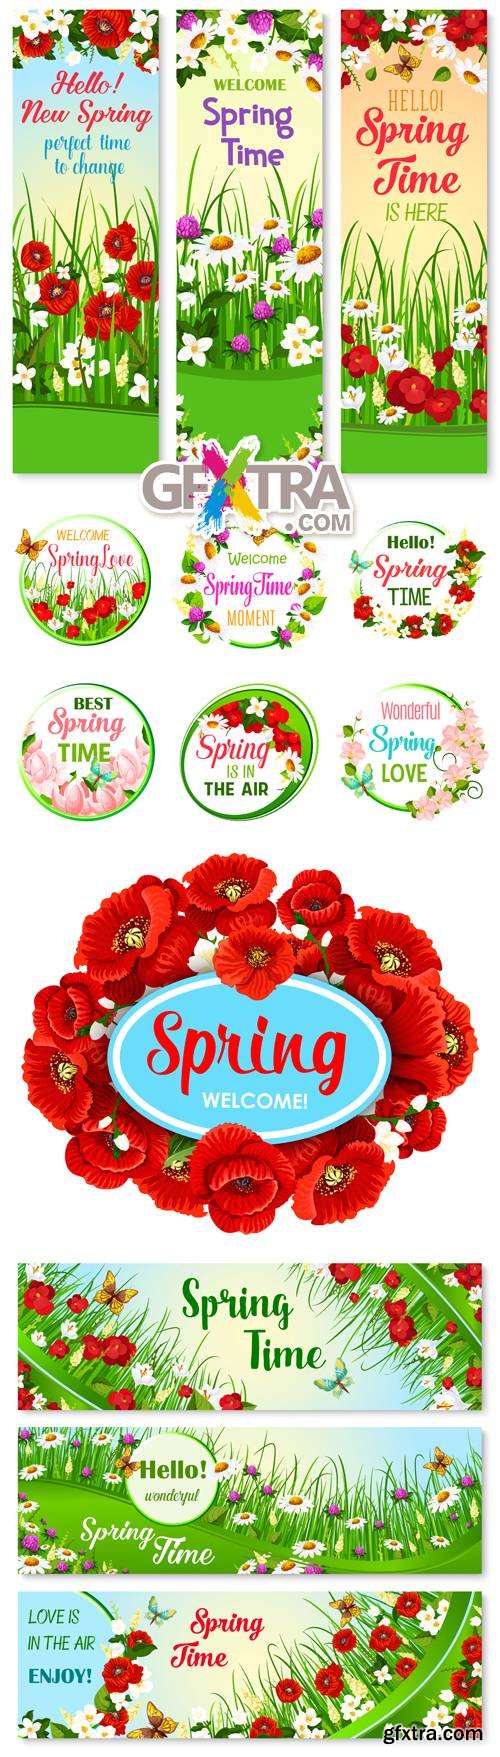 Spring Time Banners Vector